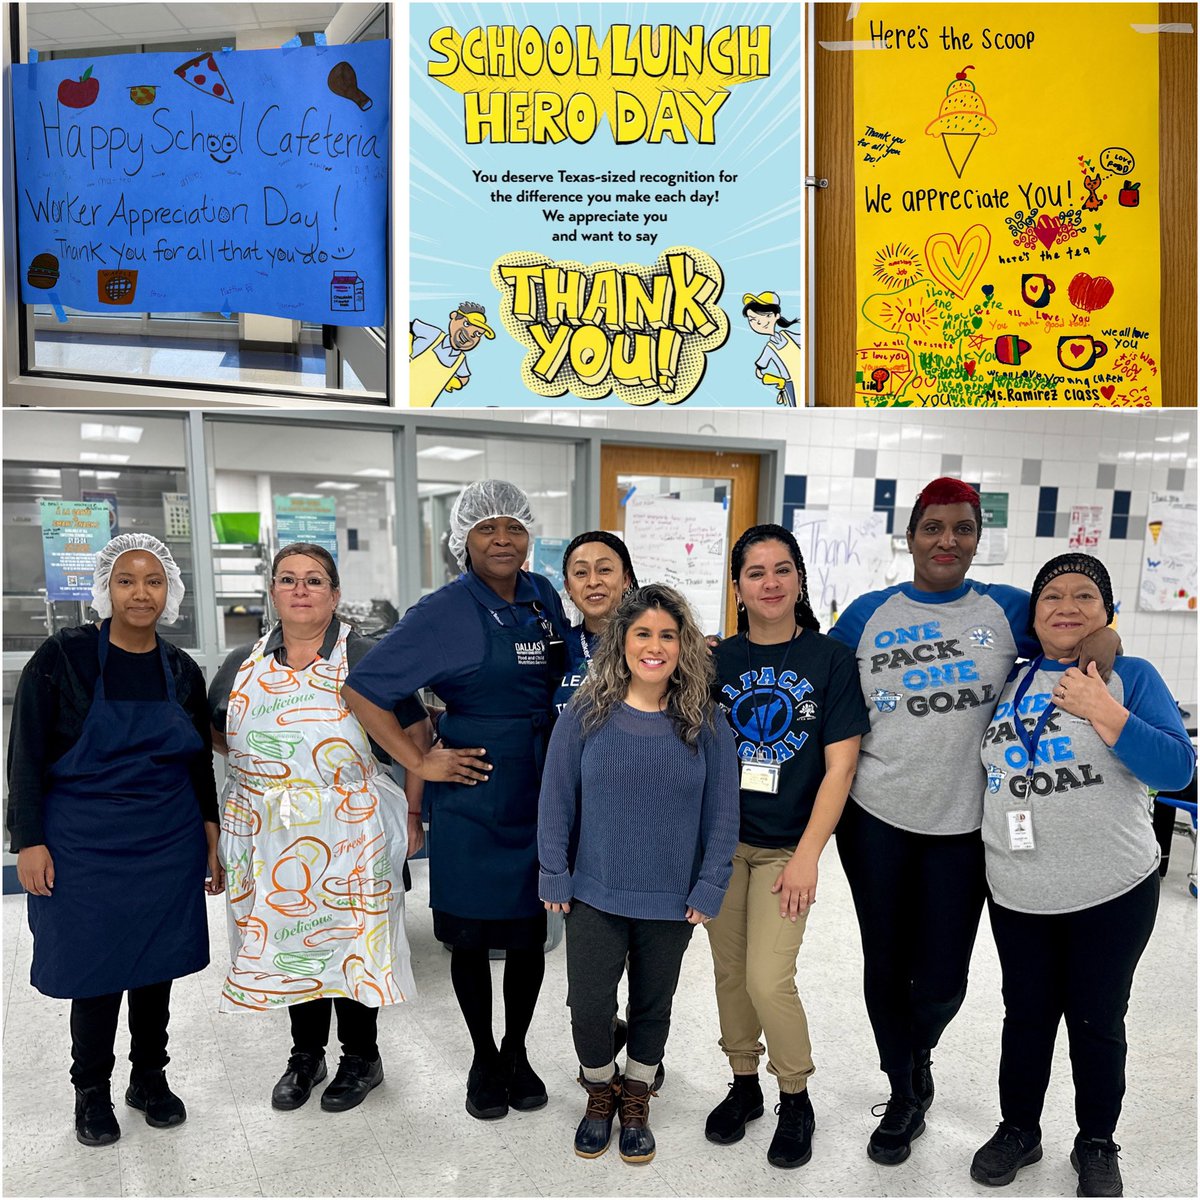 A TEXAS-SIZED shoutout to our amazing cafeteria staff on “School Lunch Hero Day” for all they do - serving over 1000 students at two schools every day with excellence!